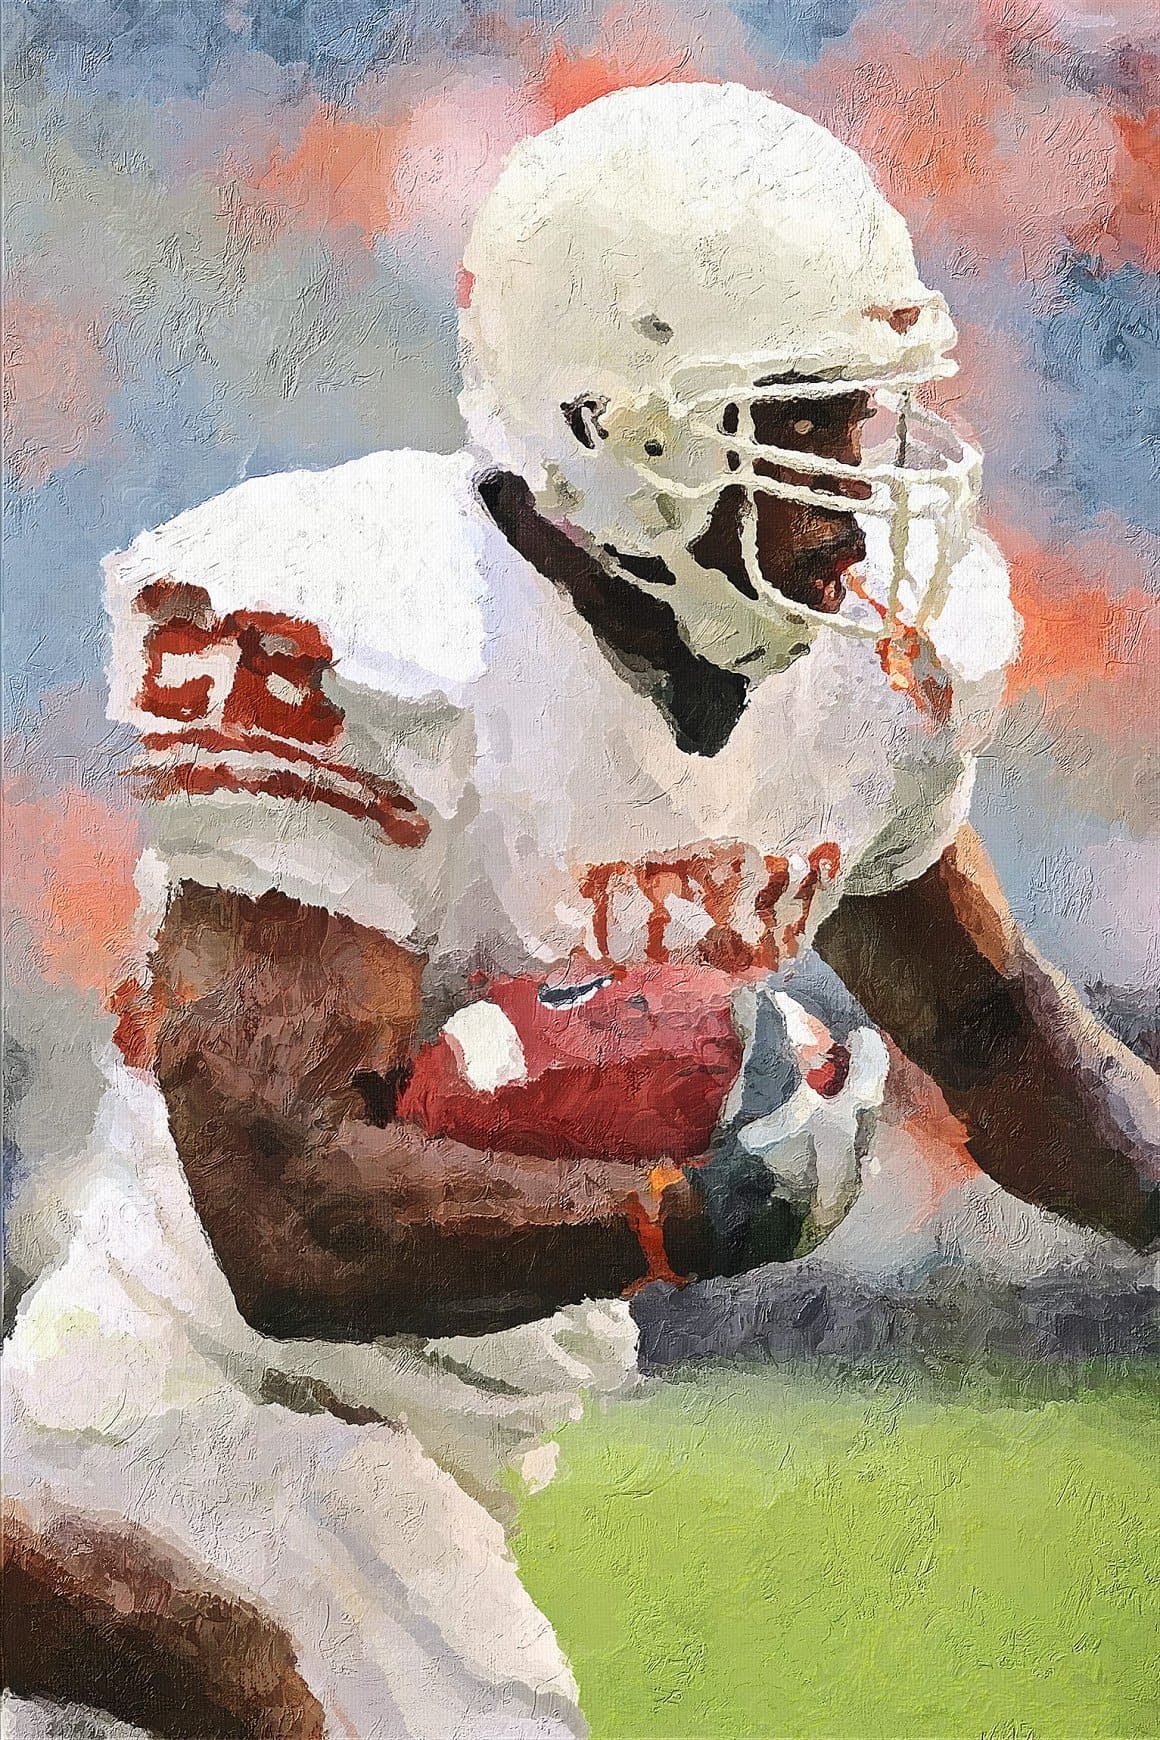 The image of a football player in a white uniform is reworked in Palette Knife Photoshop Action.